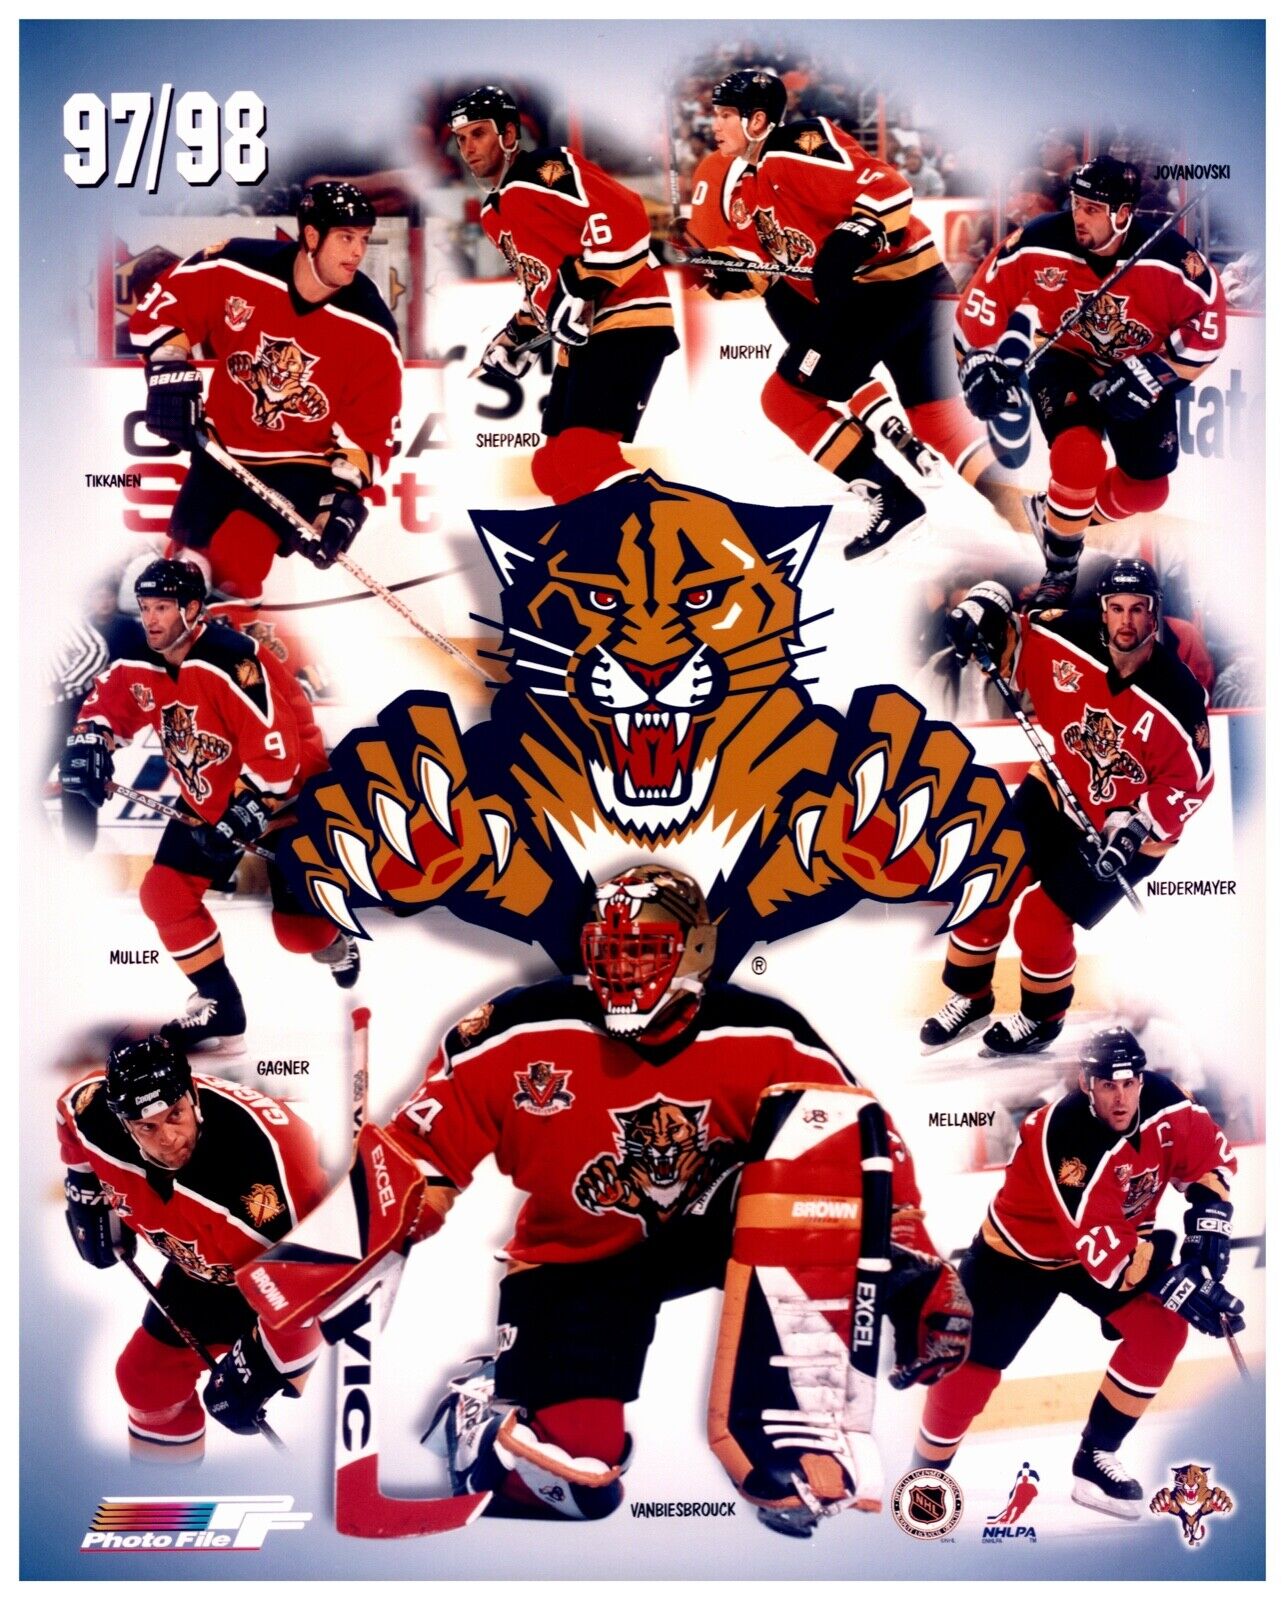 1997 / 1998 Florida Panthers Unsigned Team Composite Photo File 8x10 Photo